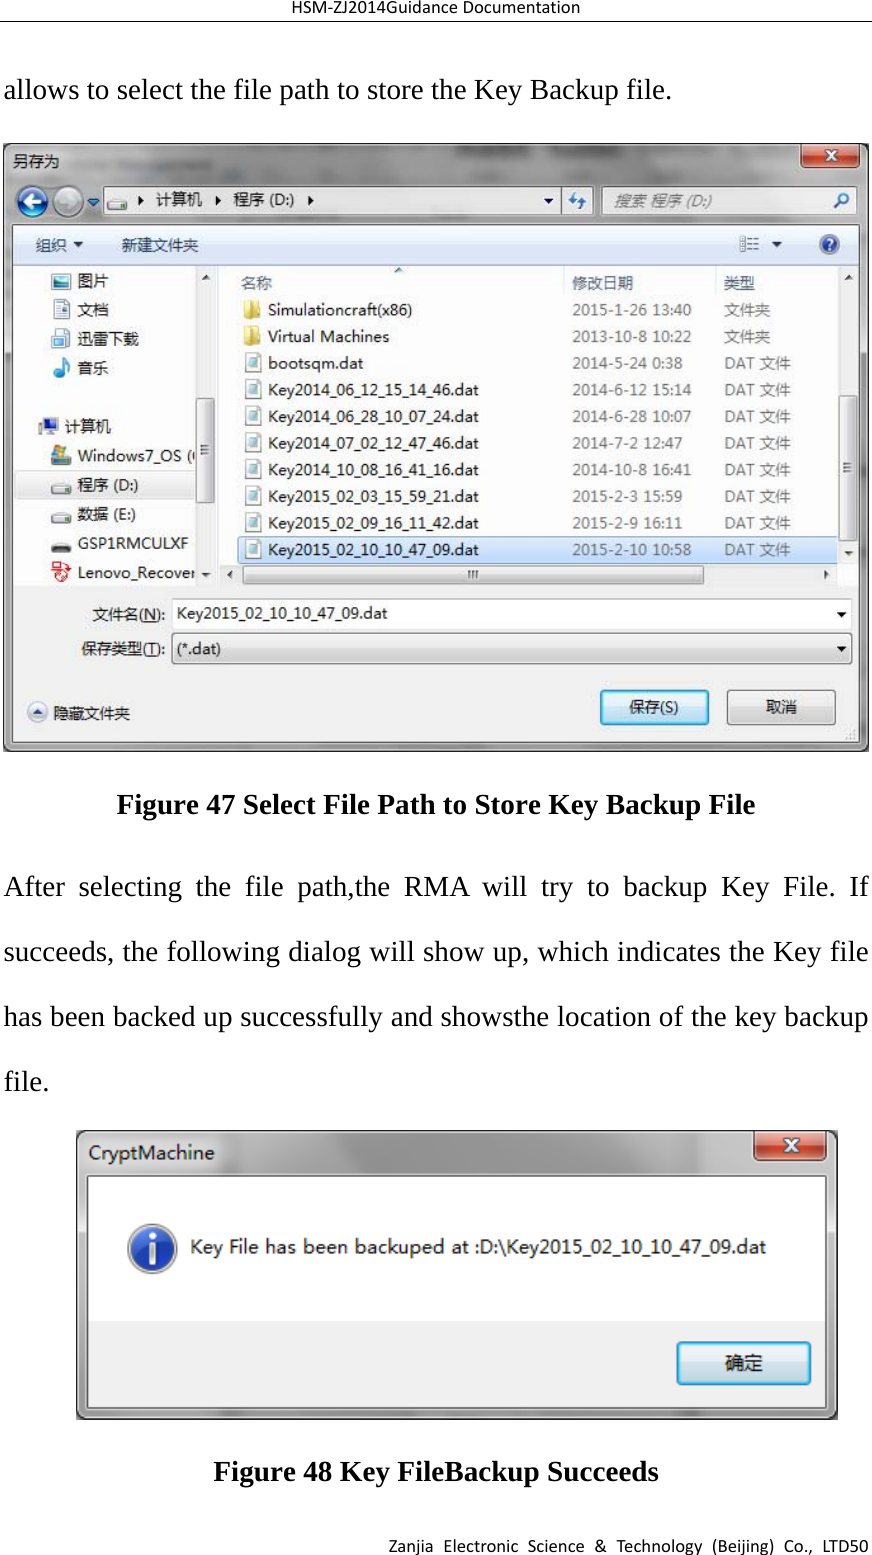 HSM‐ZJ2014GuidanceDocumentationZanjiaElectronicScience&amp;Technology(Beijing)Co.,LTD50allows to select the file path to store the Key Backup file. Figure 47 Select File Path to Store Key Backup File After selecting the file path,the RMA will try to backup Key File. If succeeds, the following dialog will show up, which indicates the Key file has been backed up successfully and showsthe location of the key backup file.   Figure 48 Key FileBackup Succeeds 